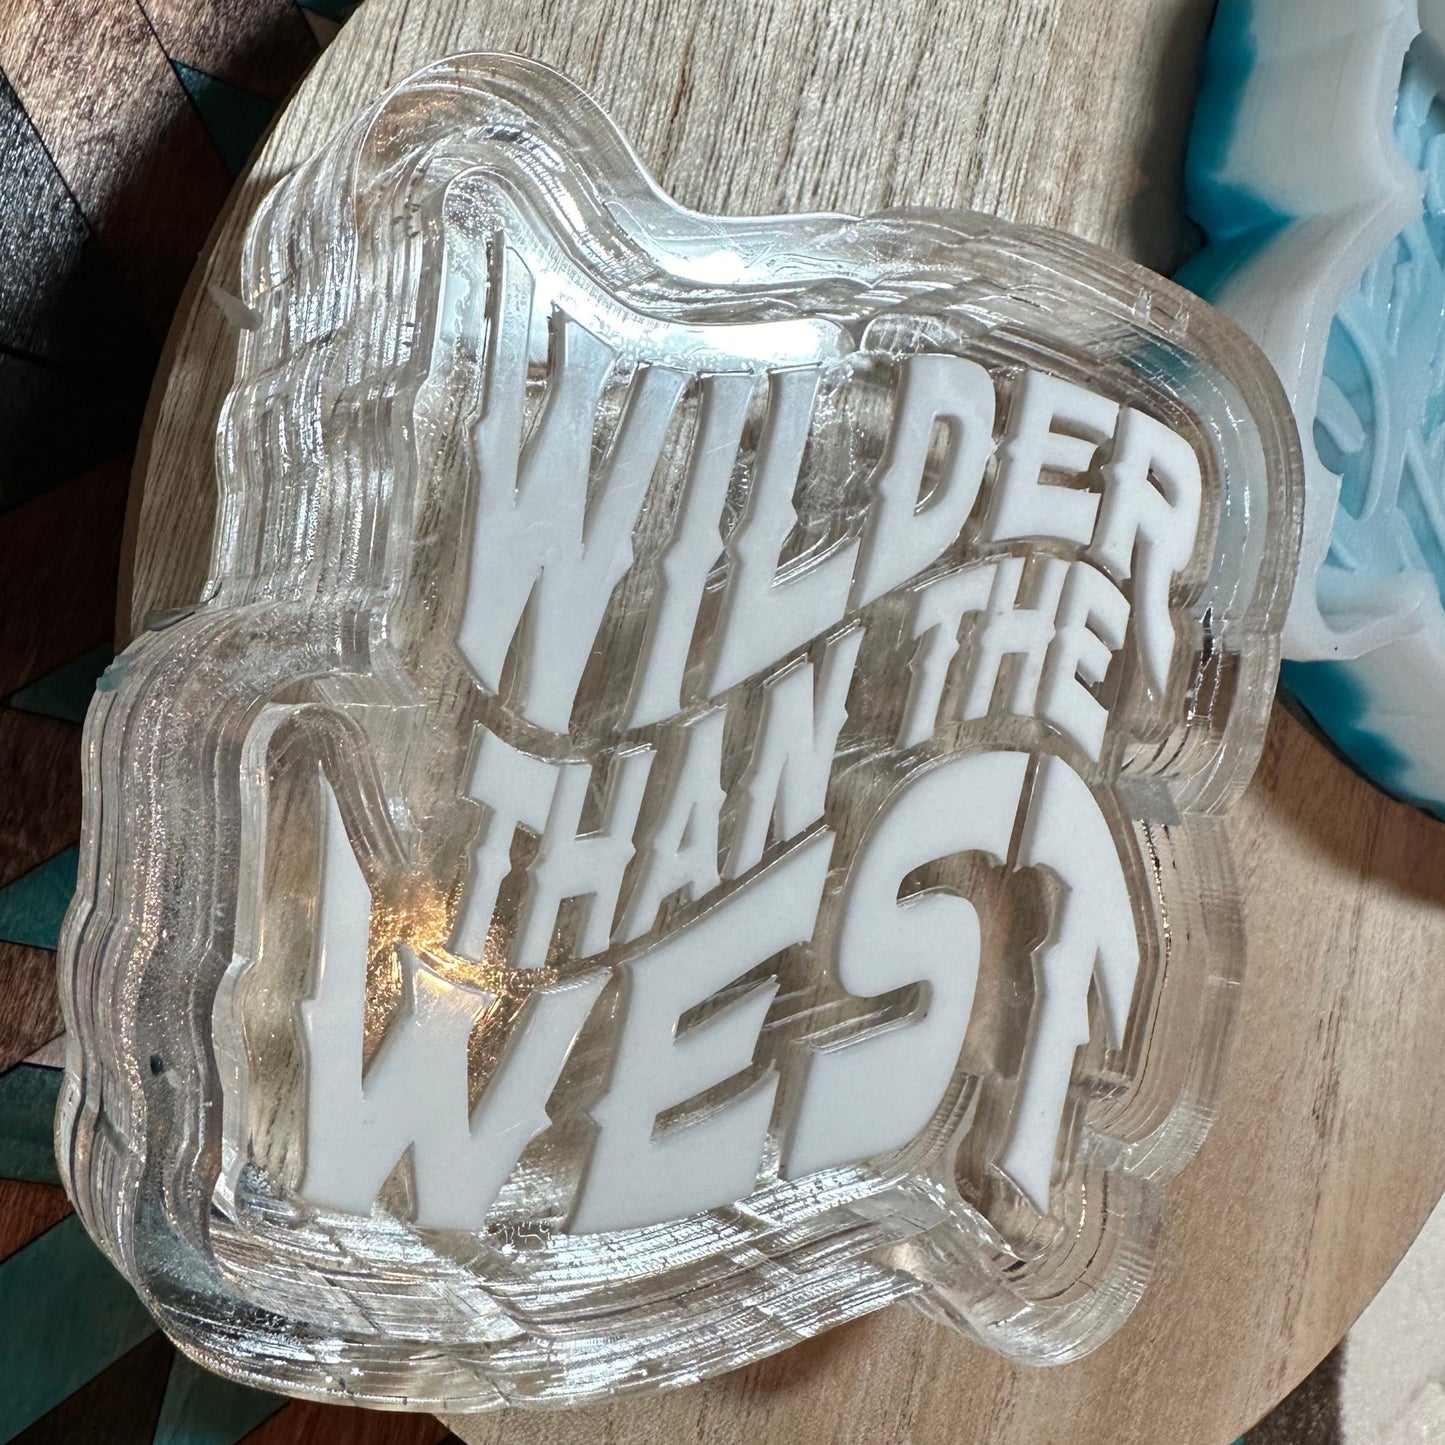 Wilder Than The West Silicone Mold